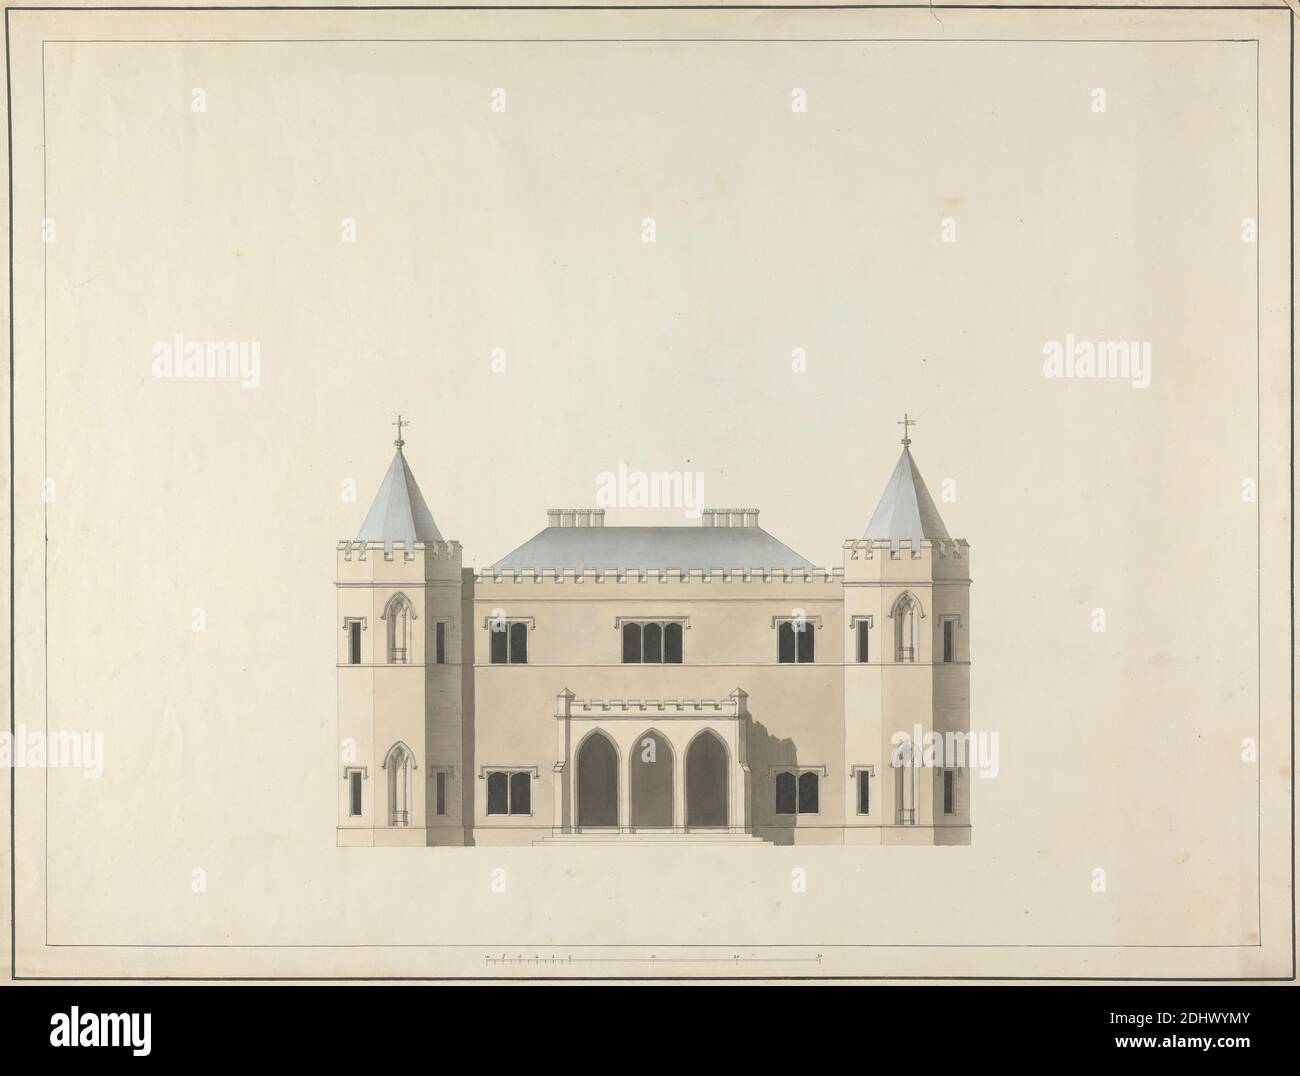 Five Designs for a House in the Gothic Style: Elevation, James Wyatt, 1746–1813, British, 1791, Watercolor and gray wash on pen and black ink on moderately thick, slightly textured, cream wove paper, Sheet: 43 1/4 × 23 3/8 inches (109.9 × 59.4 cm), architectural subject, chimneys (architectural elements), elevations (drawings), stairs Stock Photo